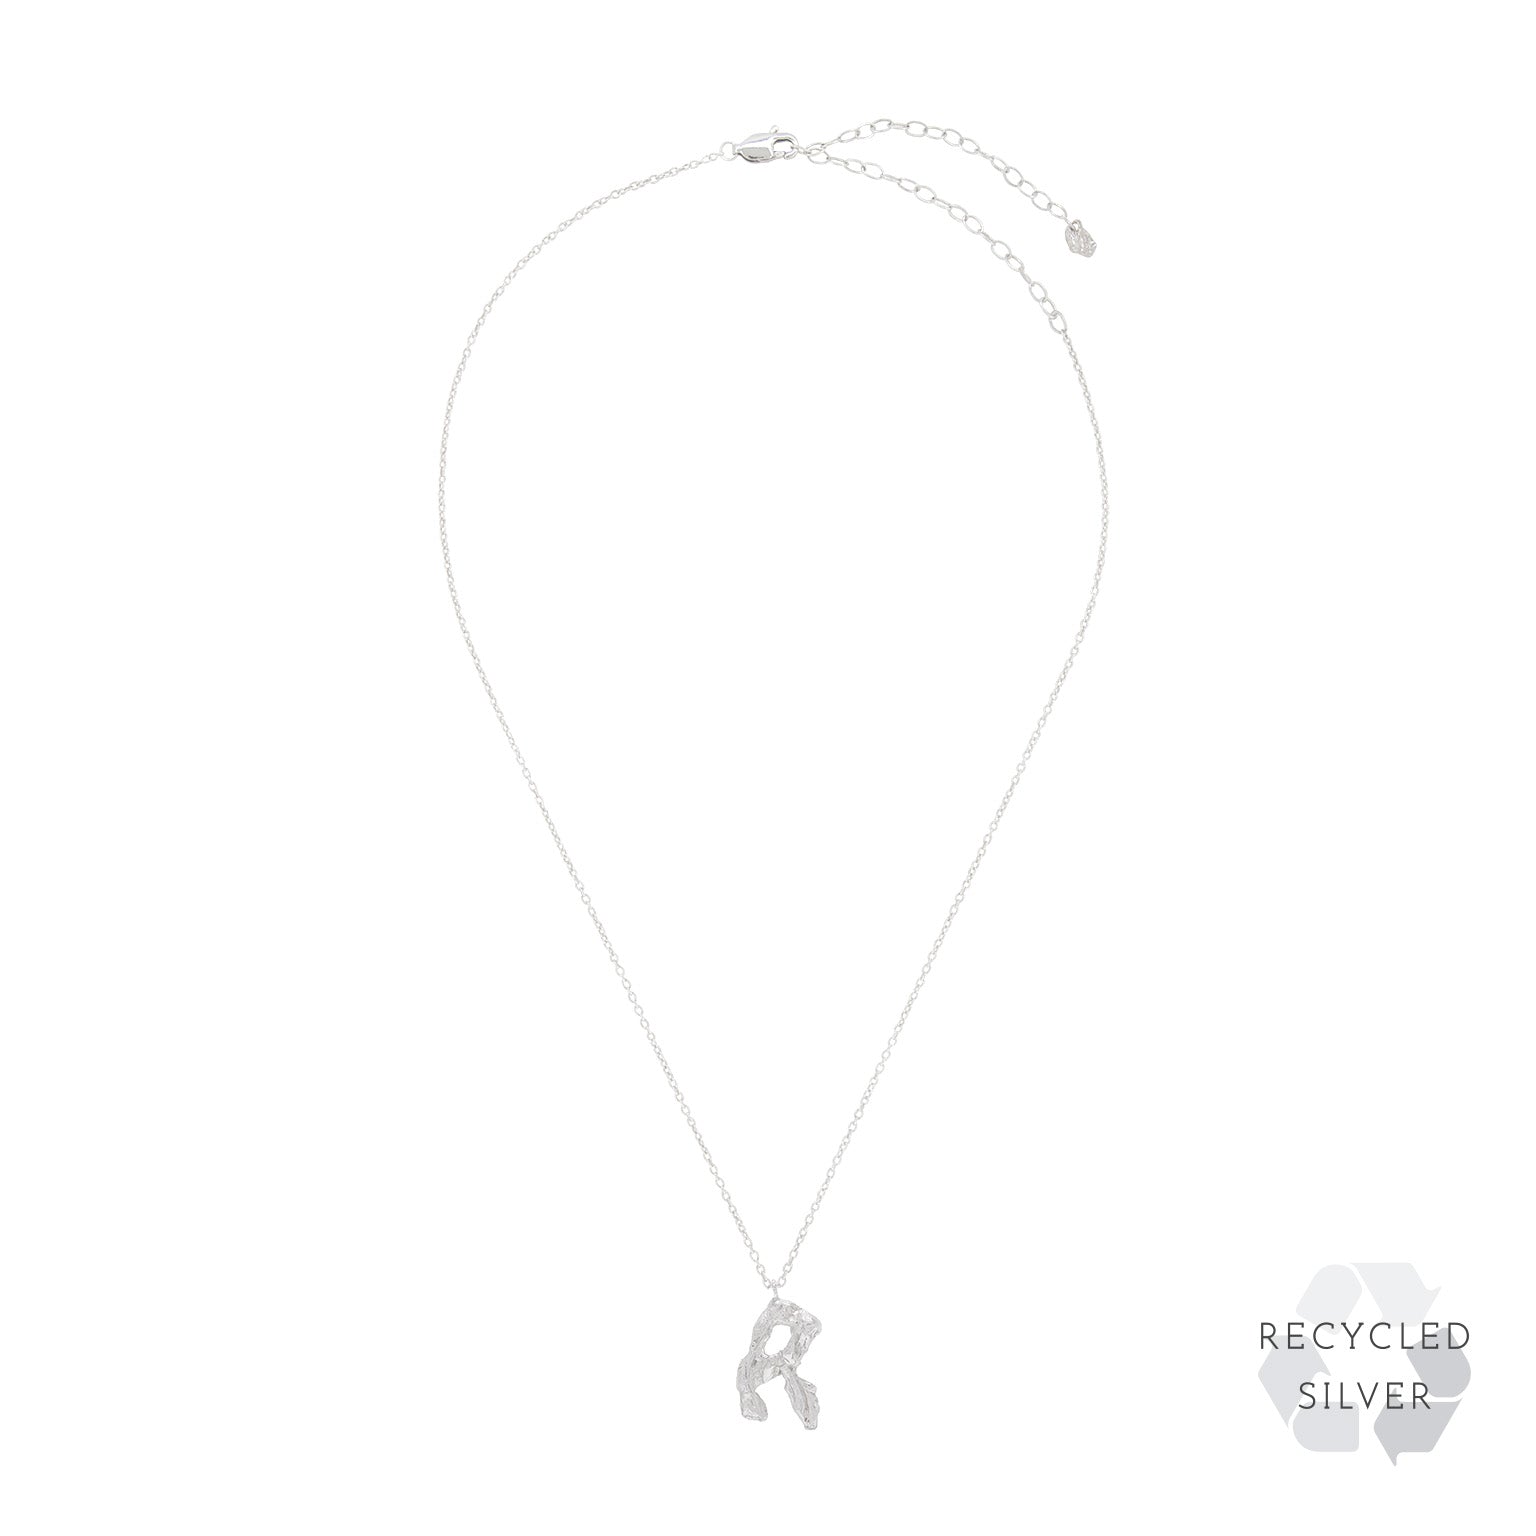 R Alphabet Recycled Silver Necklace